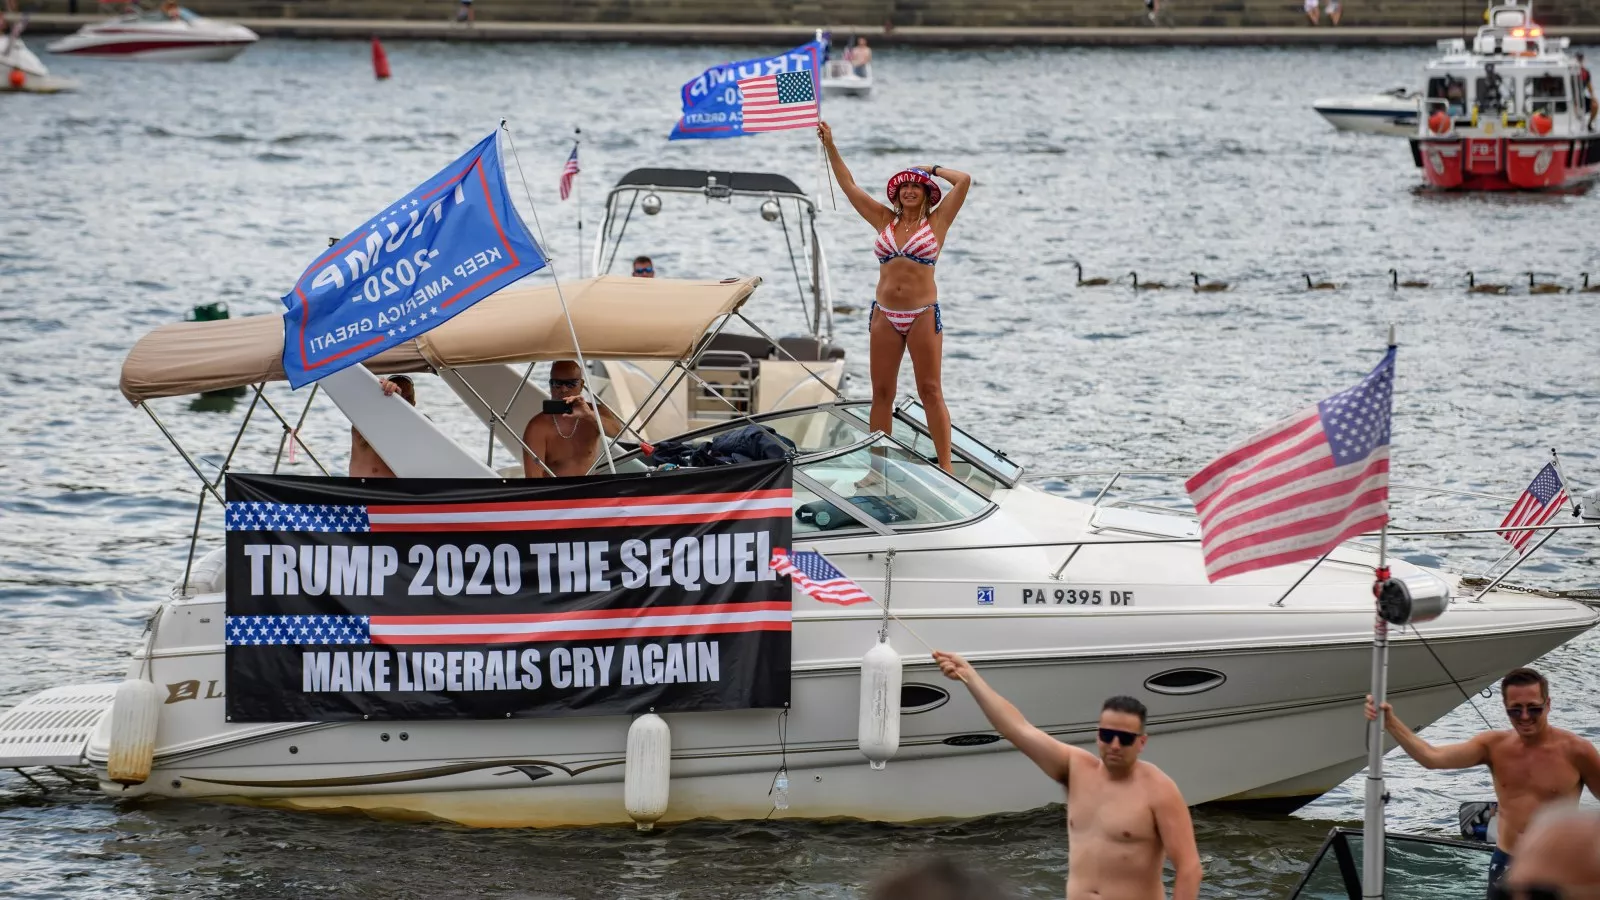 Boaters flood the Detroit river in a vibrant display of support to celebrate Donald Trump's 78th birthday.